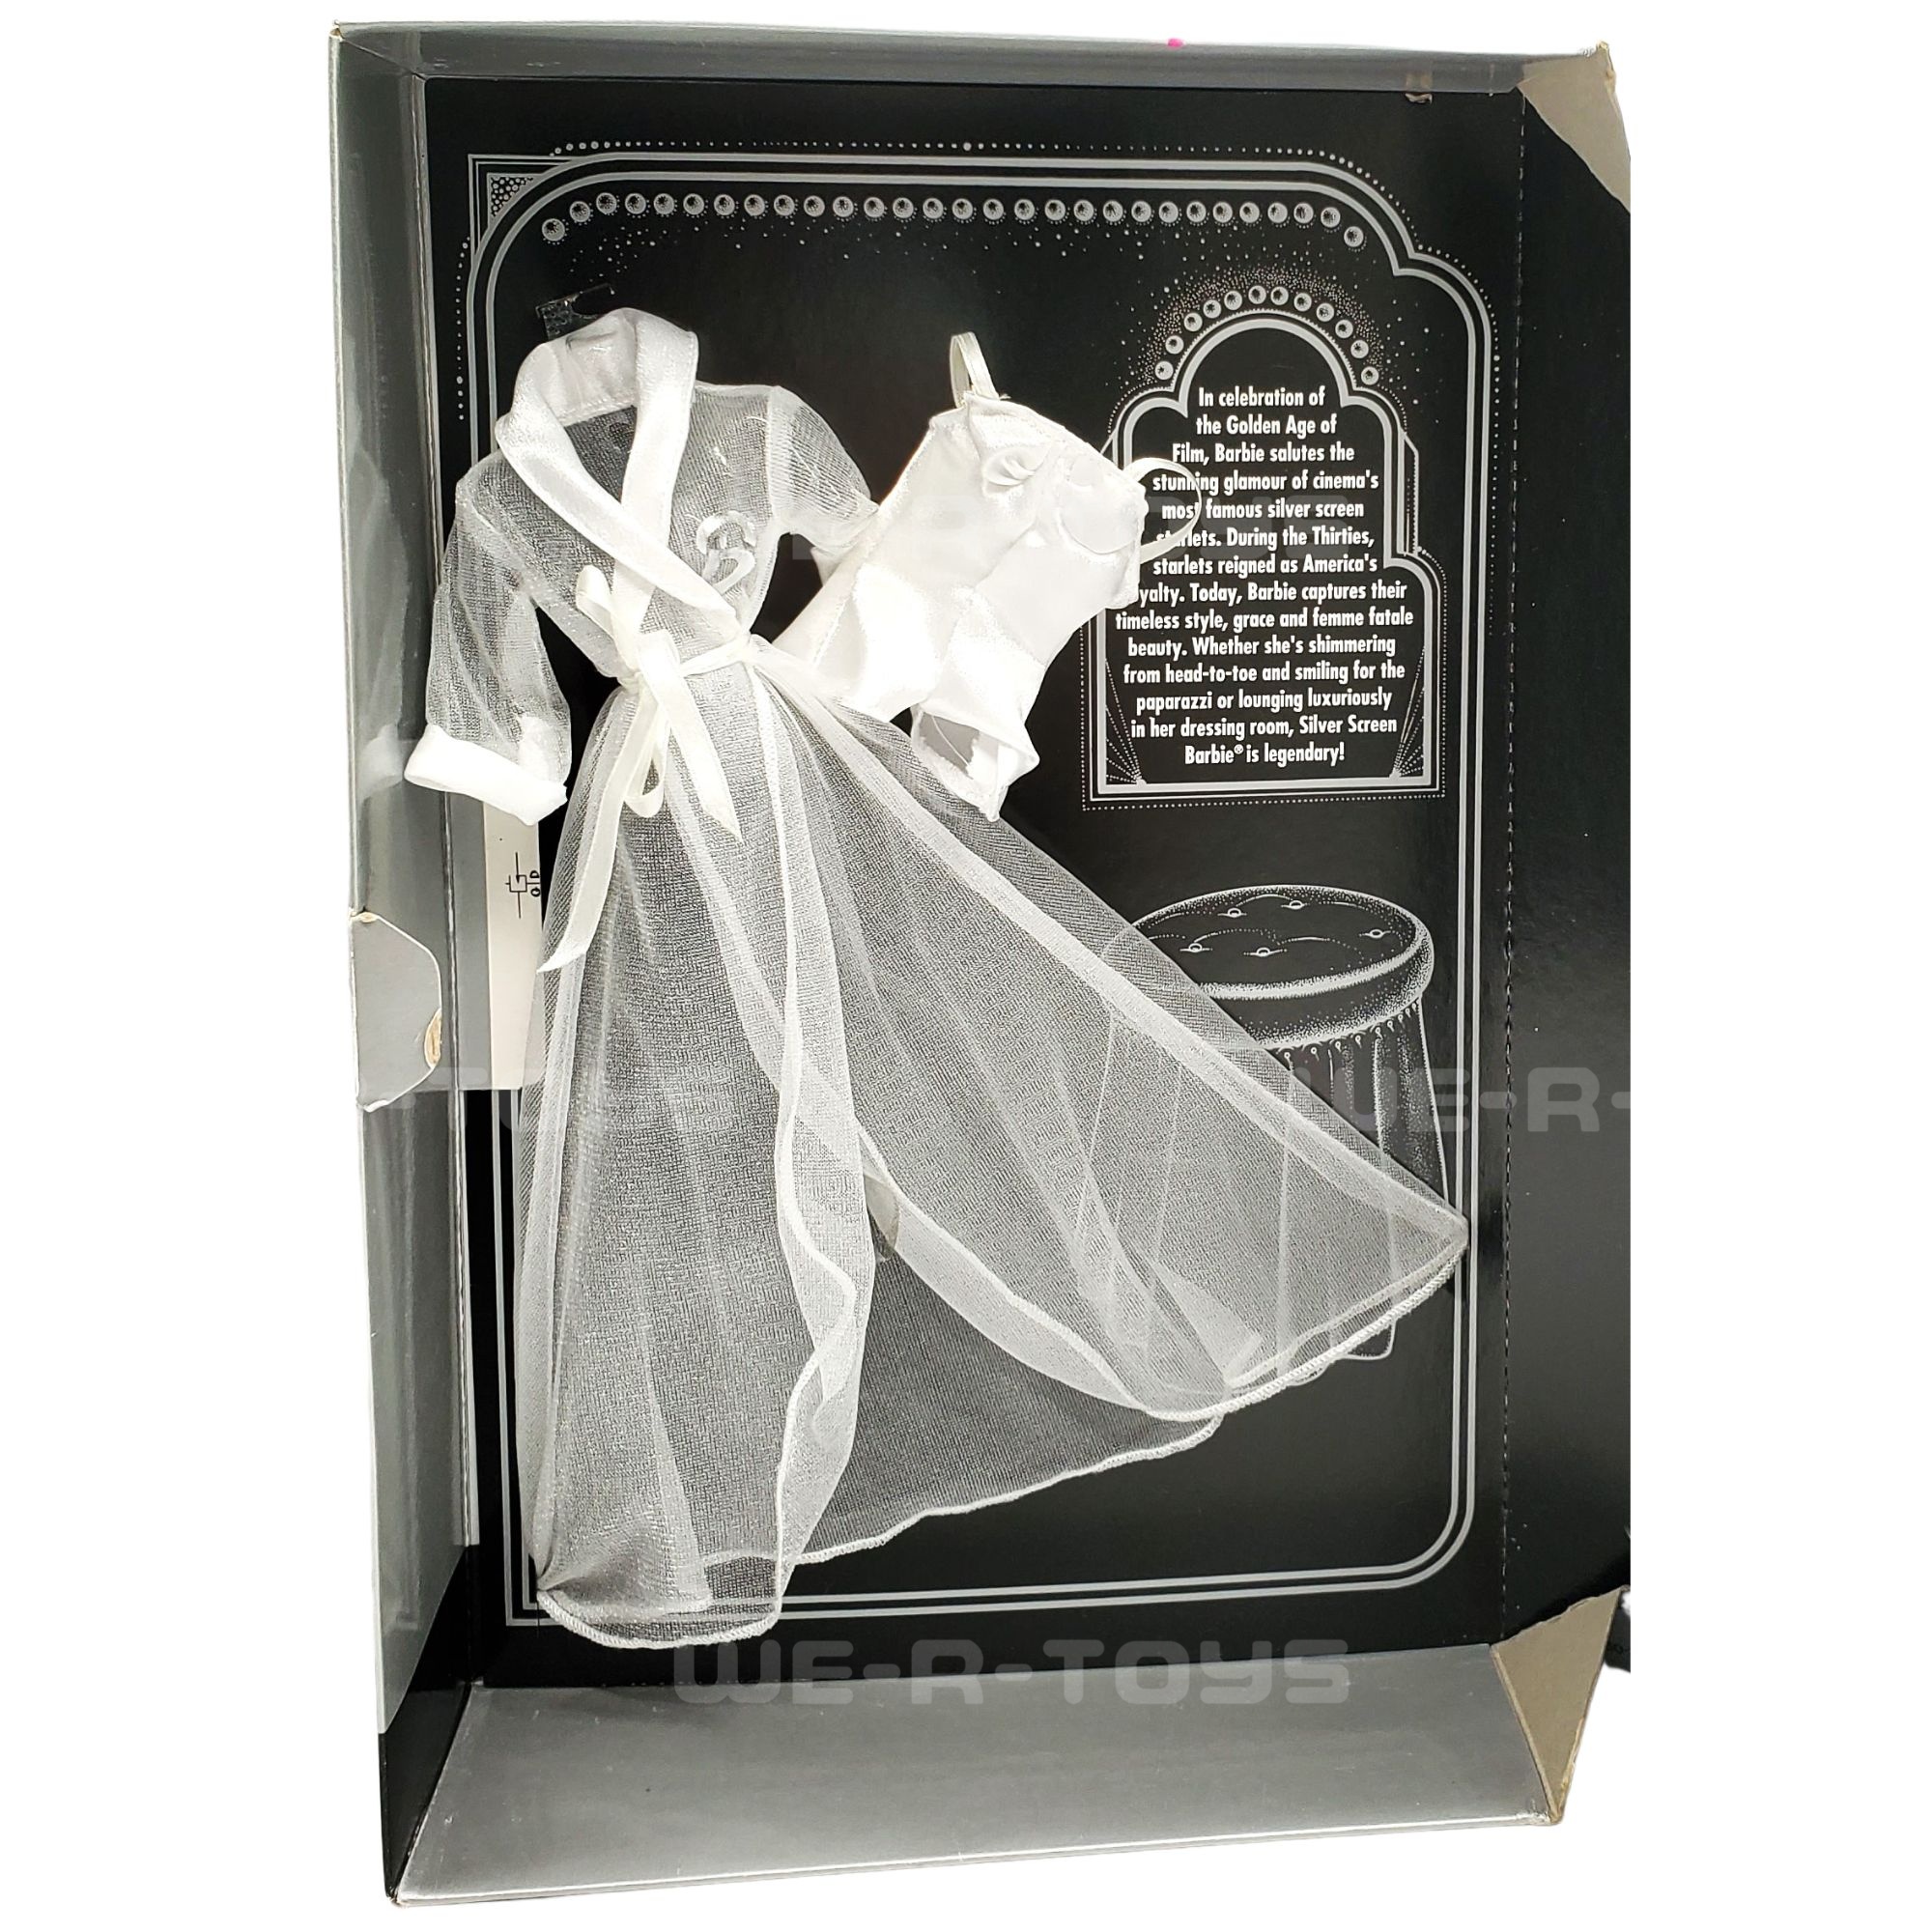 Silver Screen Barbie Doll FAO Schwarz Exclusive Special Limited Edition 1993 - image 3 of 6